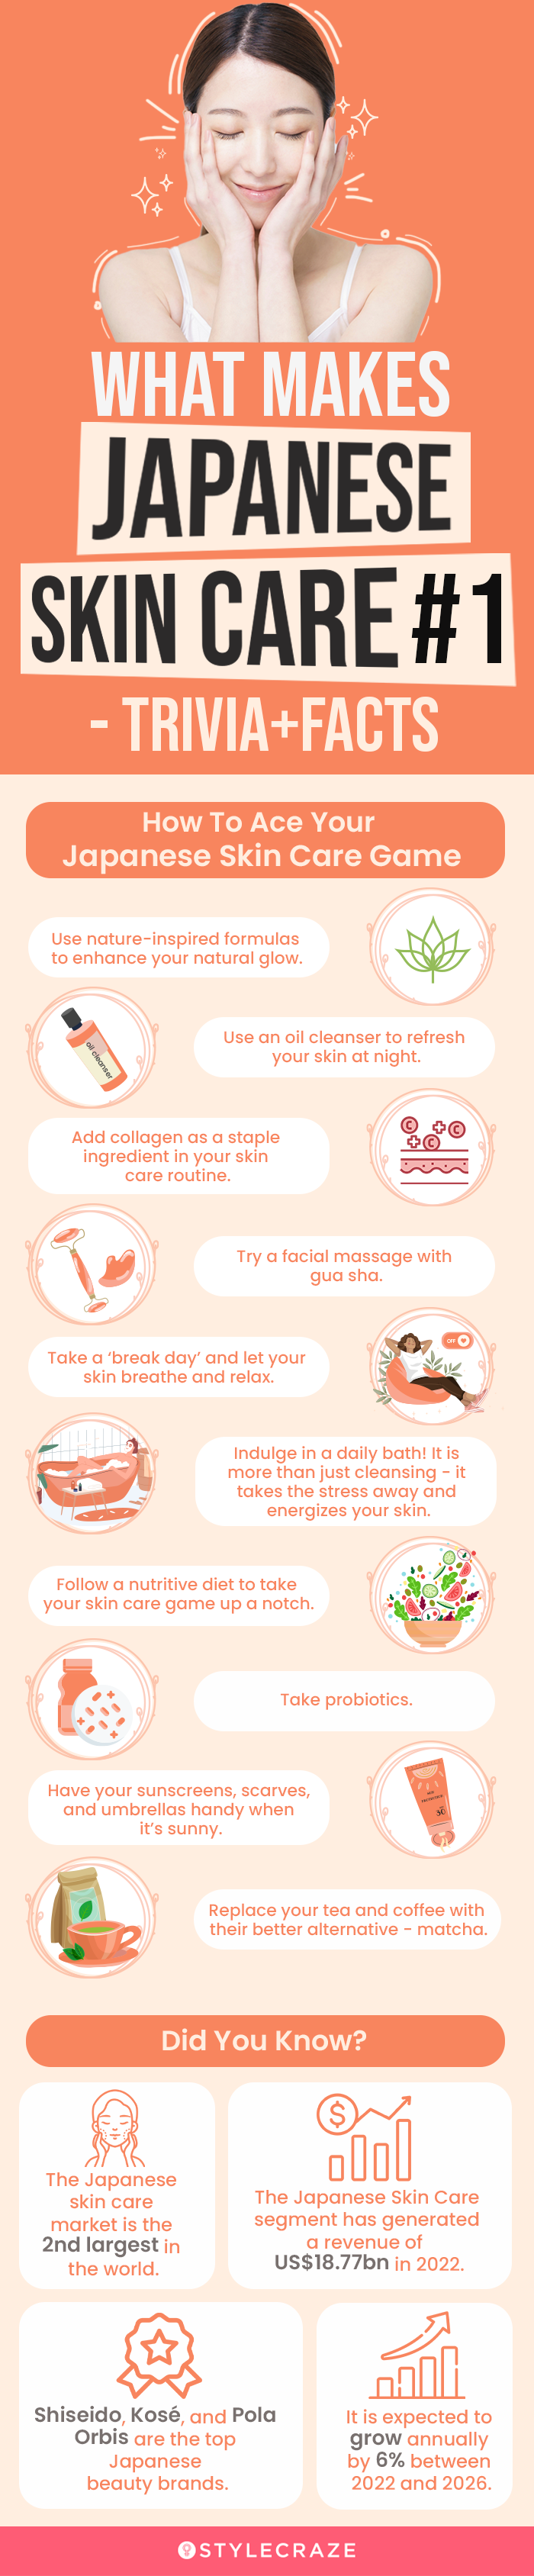 What Makes Japanese Skin Care #1 - Trivia Facts